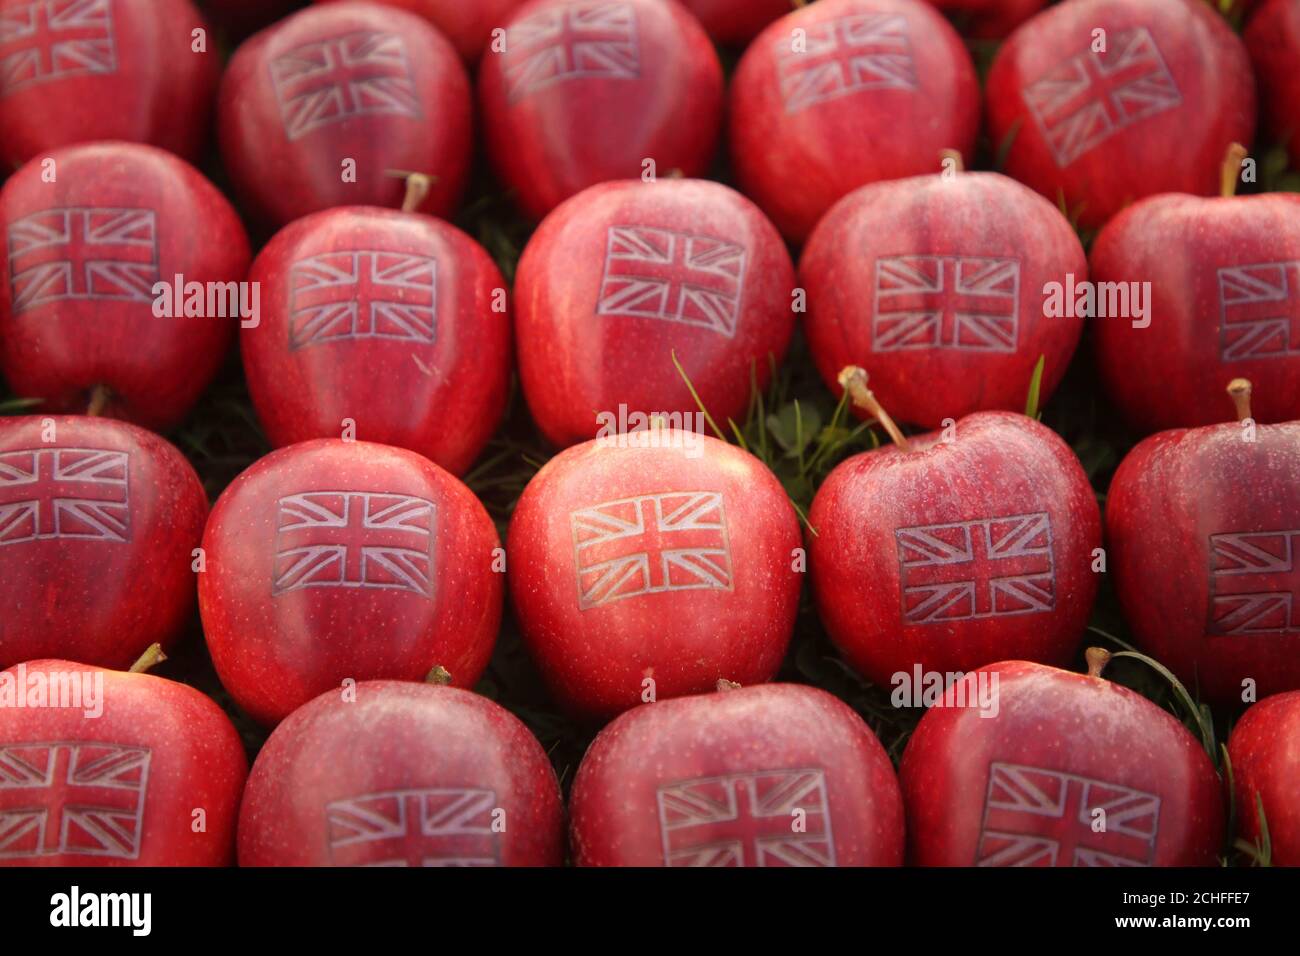 An apple grower in Kent laser cuts 365 British apples with the Union Jack to mark the start of the British apple season. Stock Photo